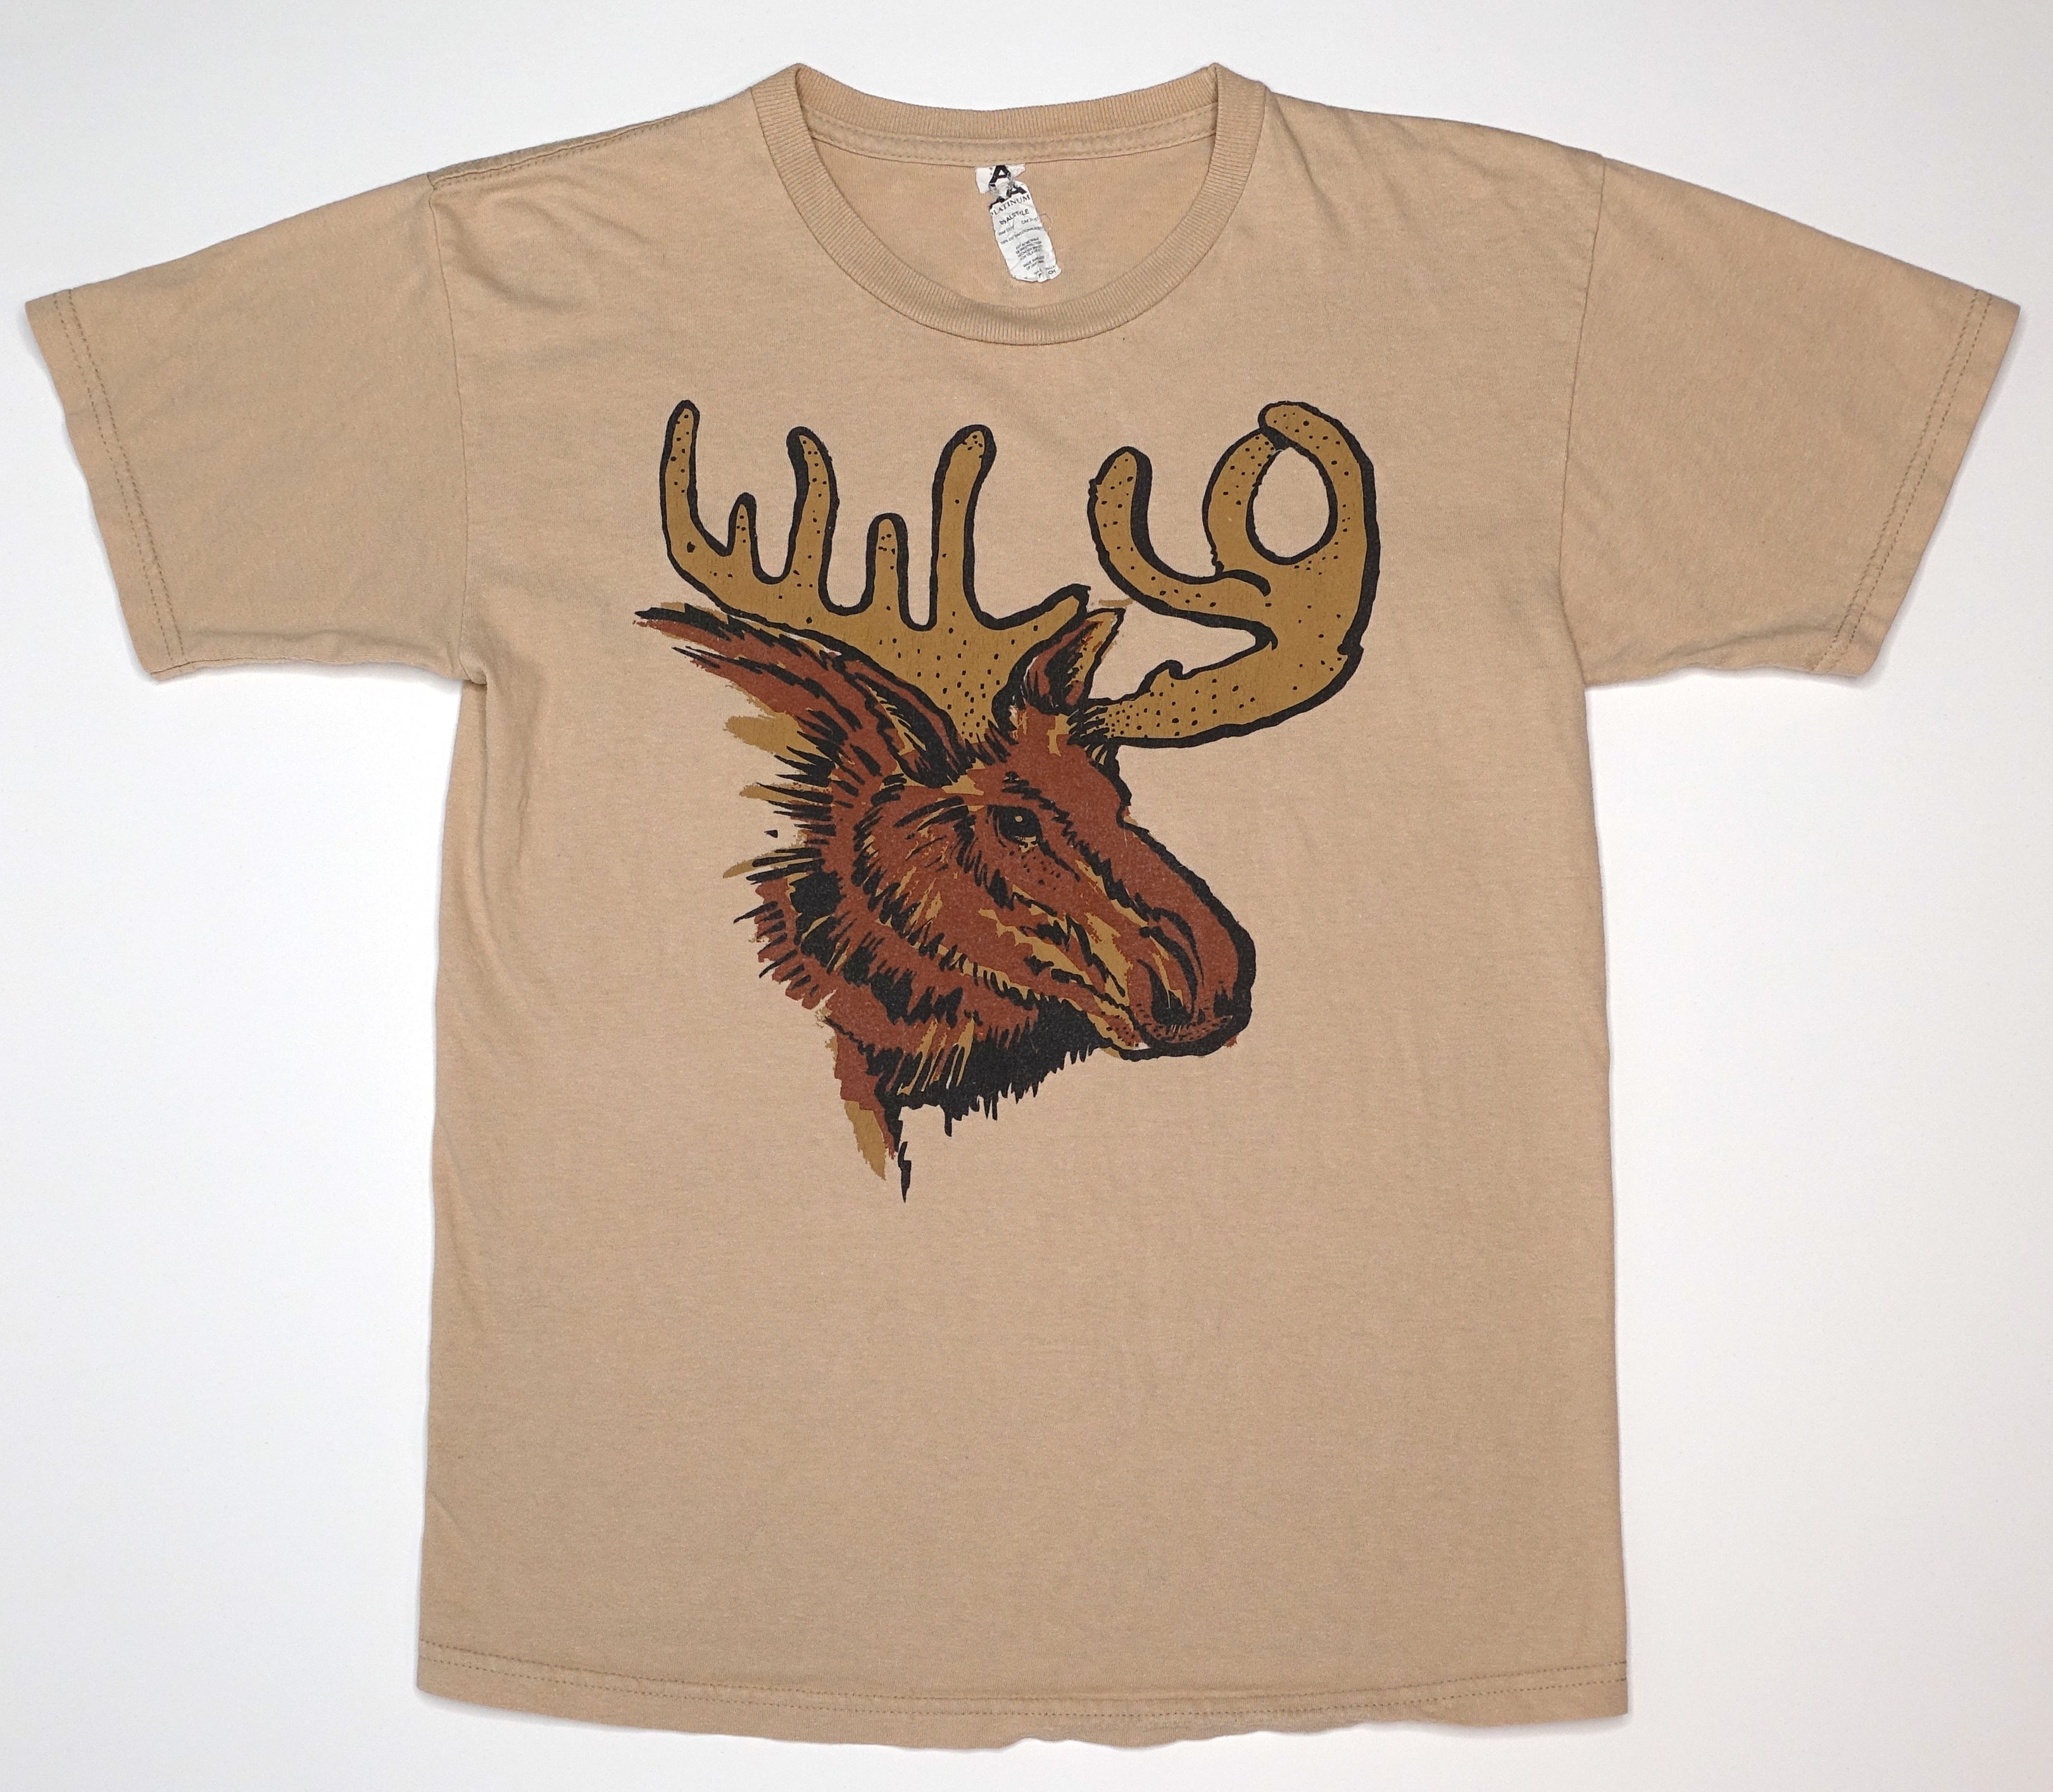 Wilco ‎– Wilco 2010 Canadian Moose Notes Tour Shirt Size Small